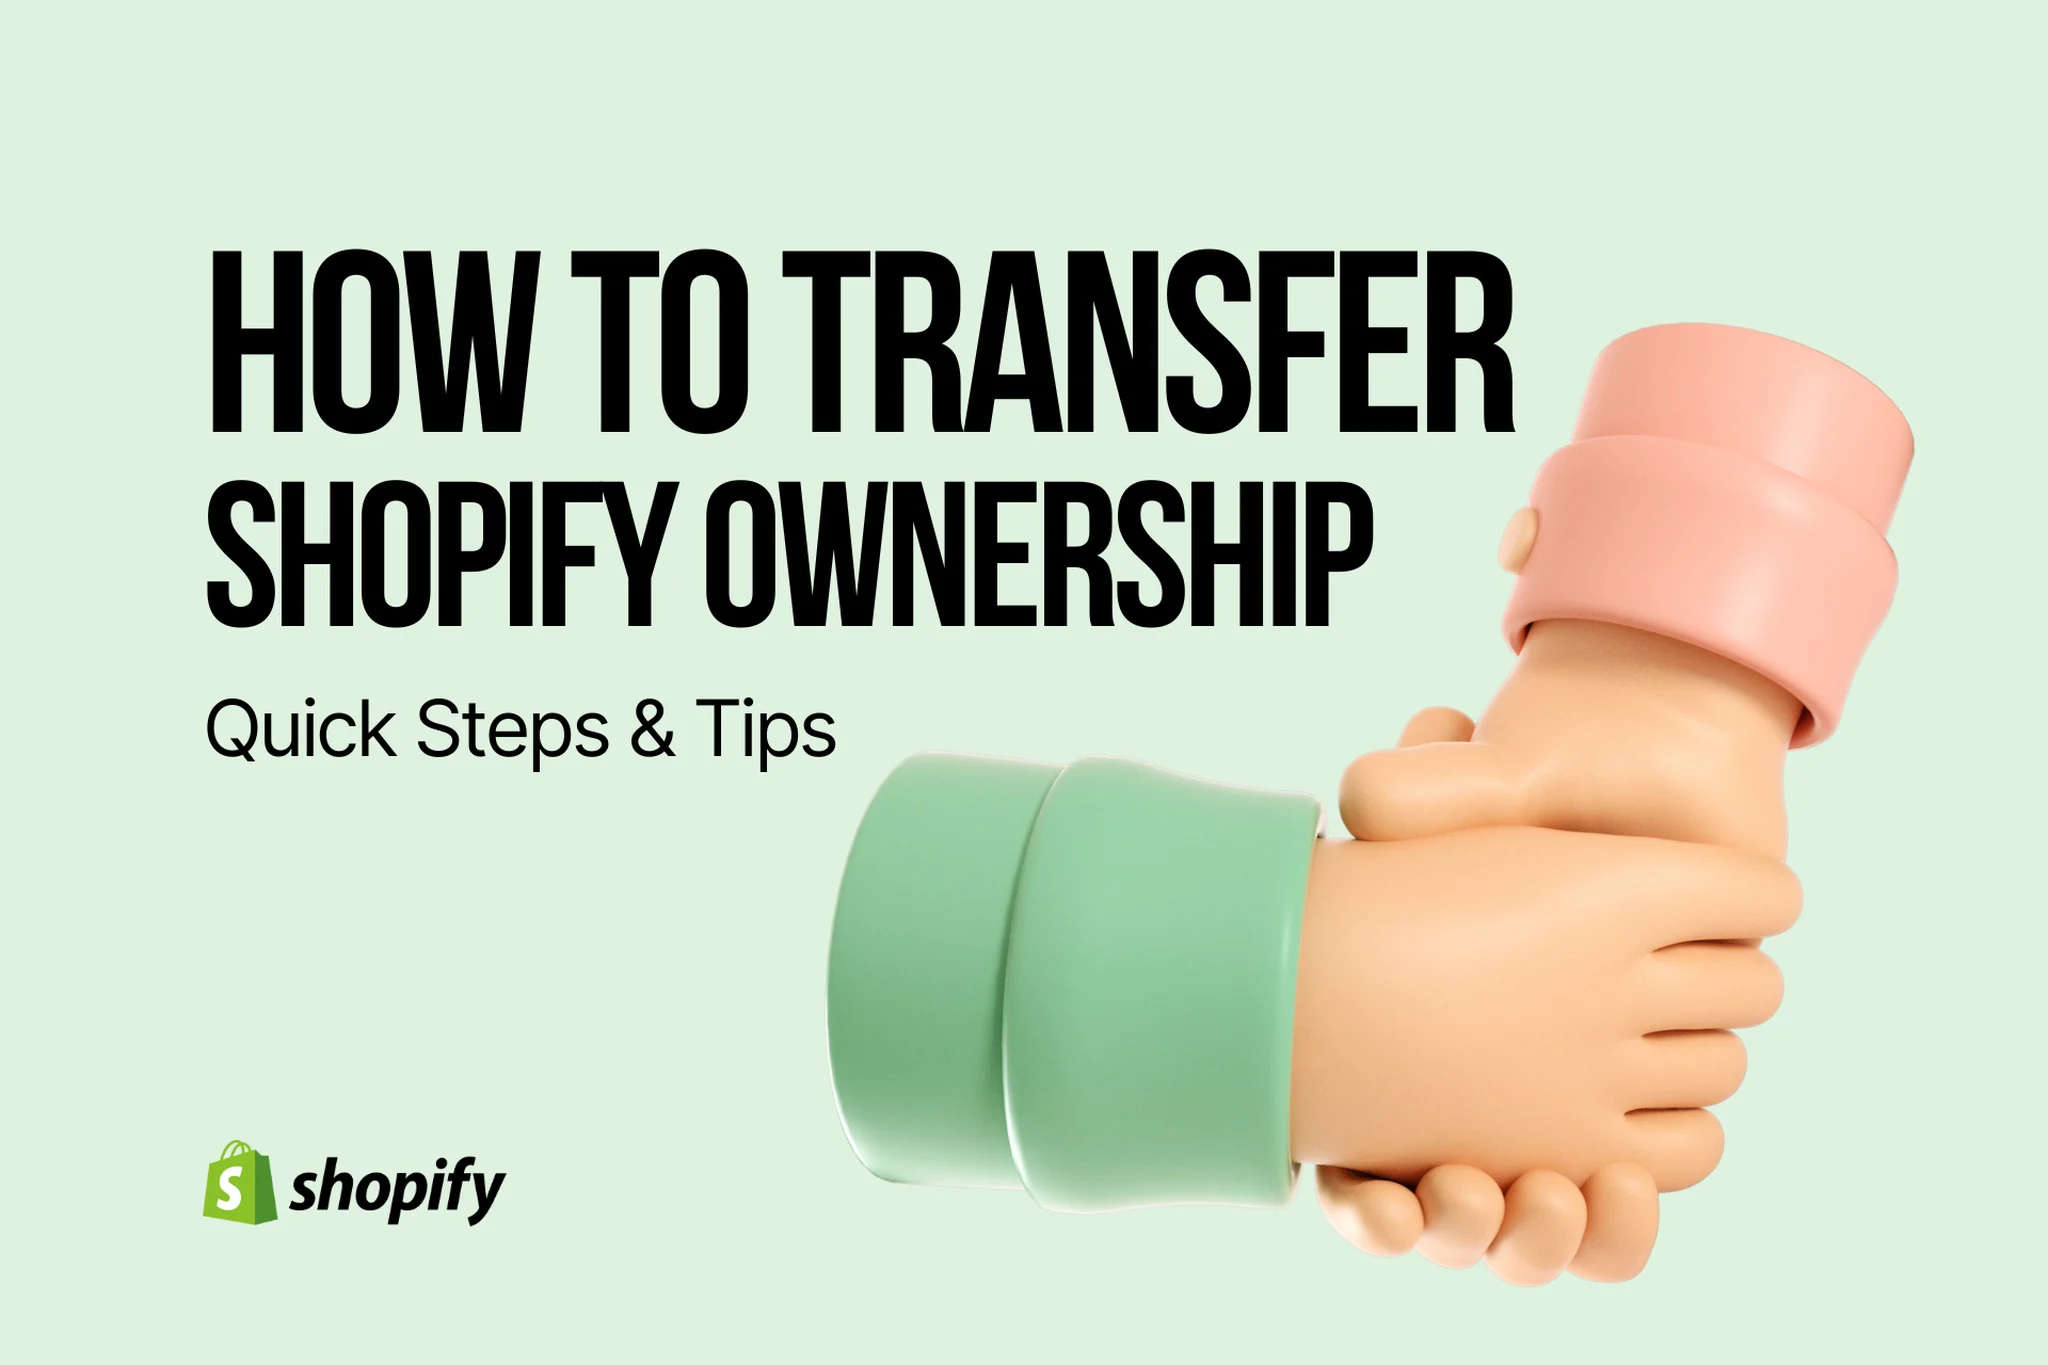 How to Transfer Shopify Ownership (Quick Steps & Tips)